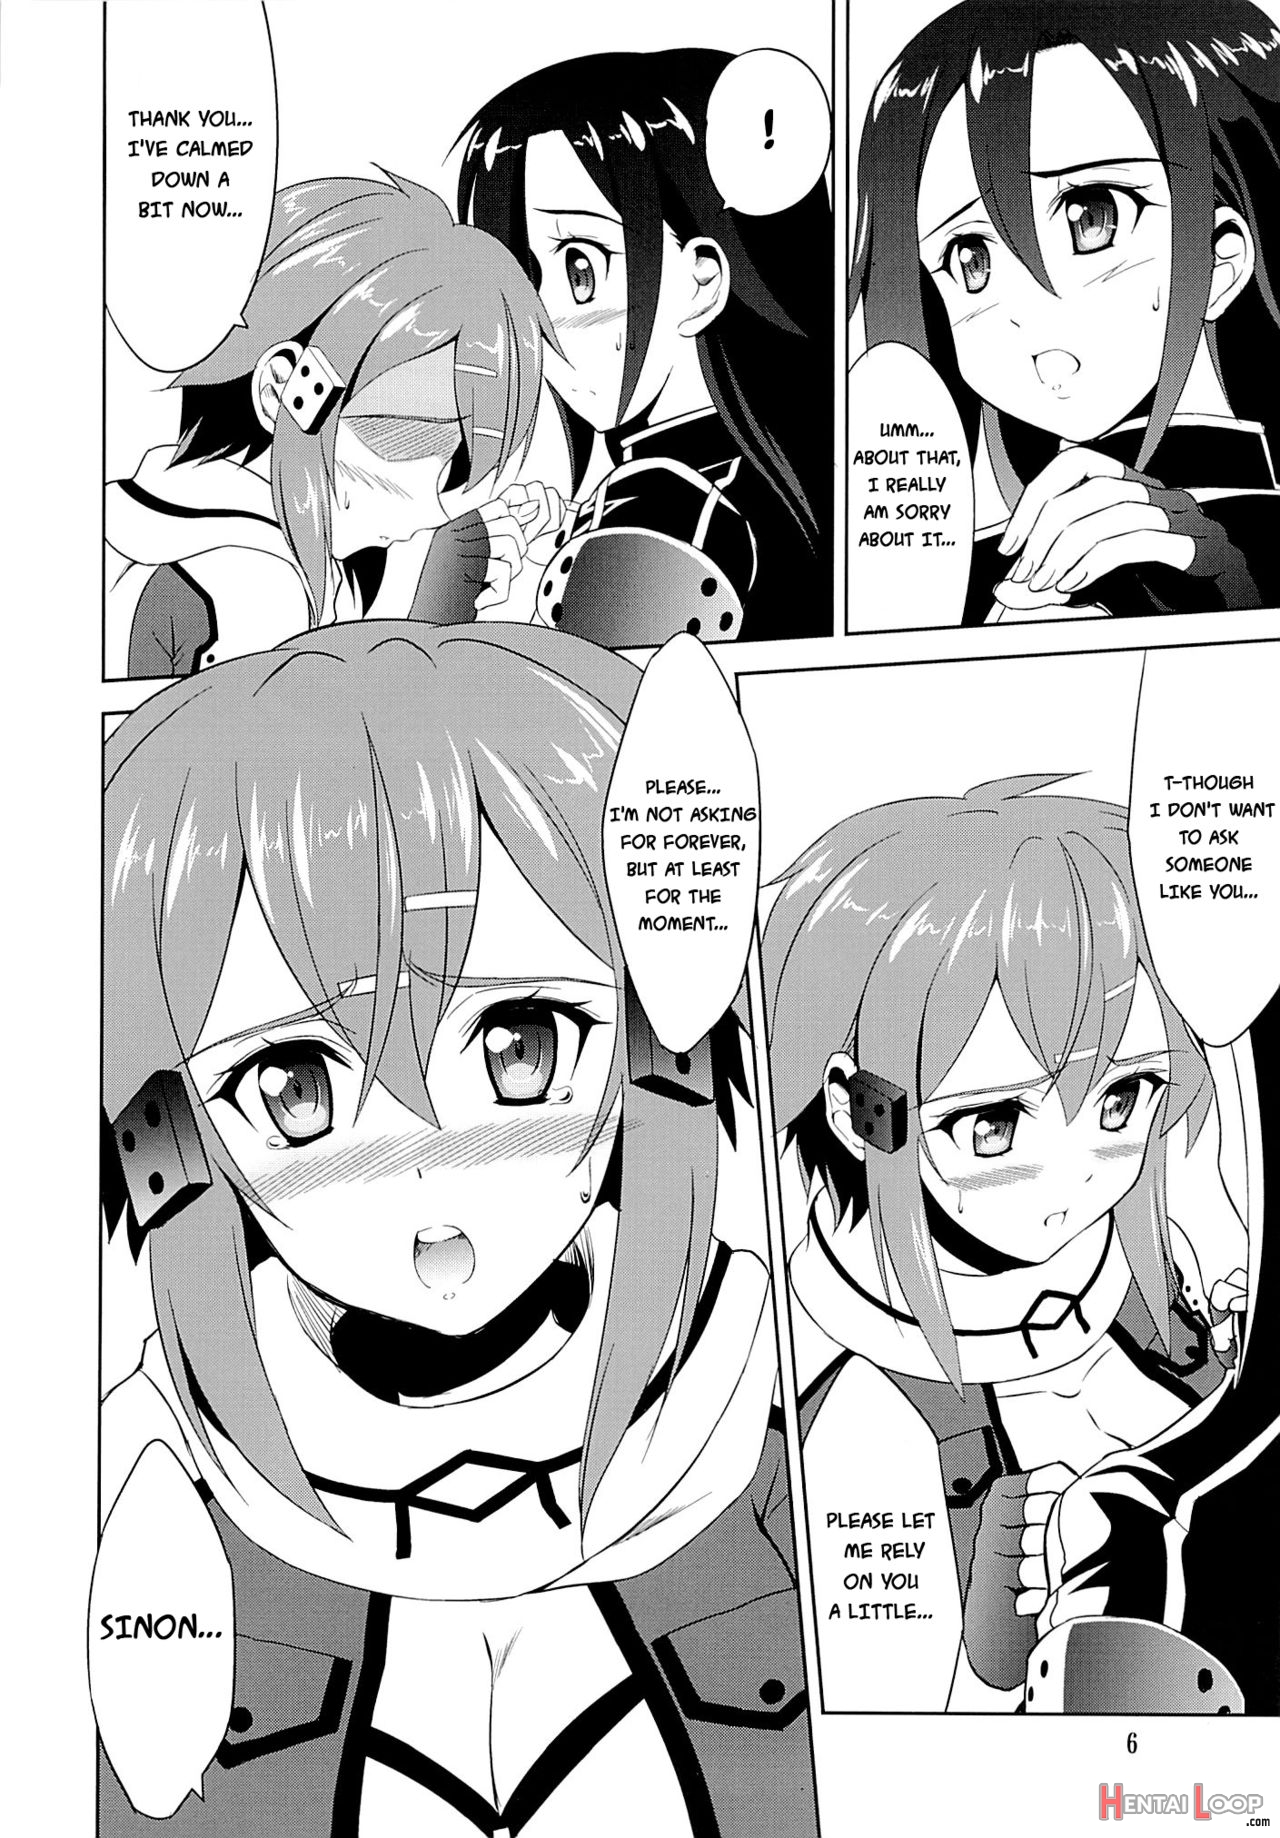 Sinon On The Counterattack page 5